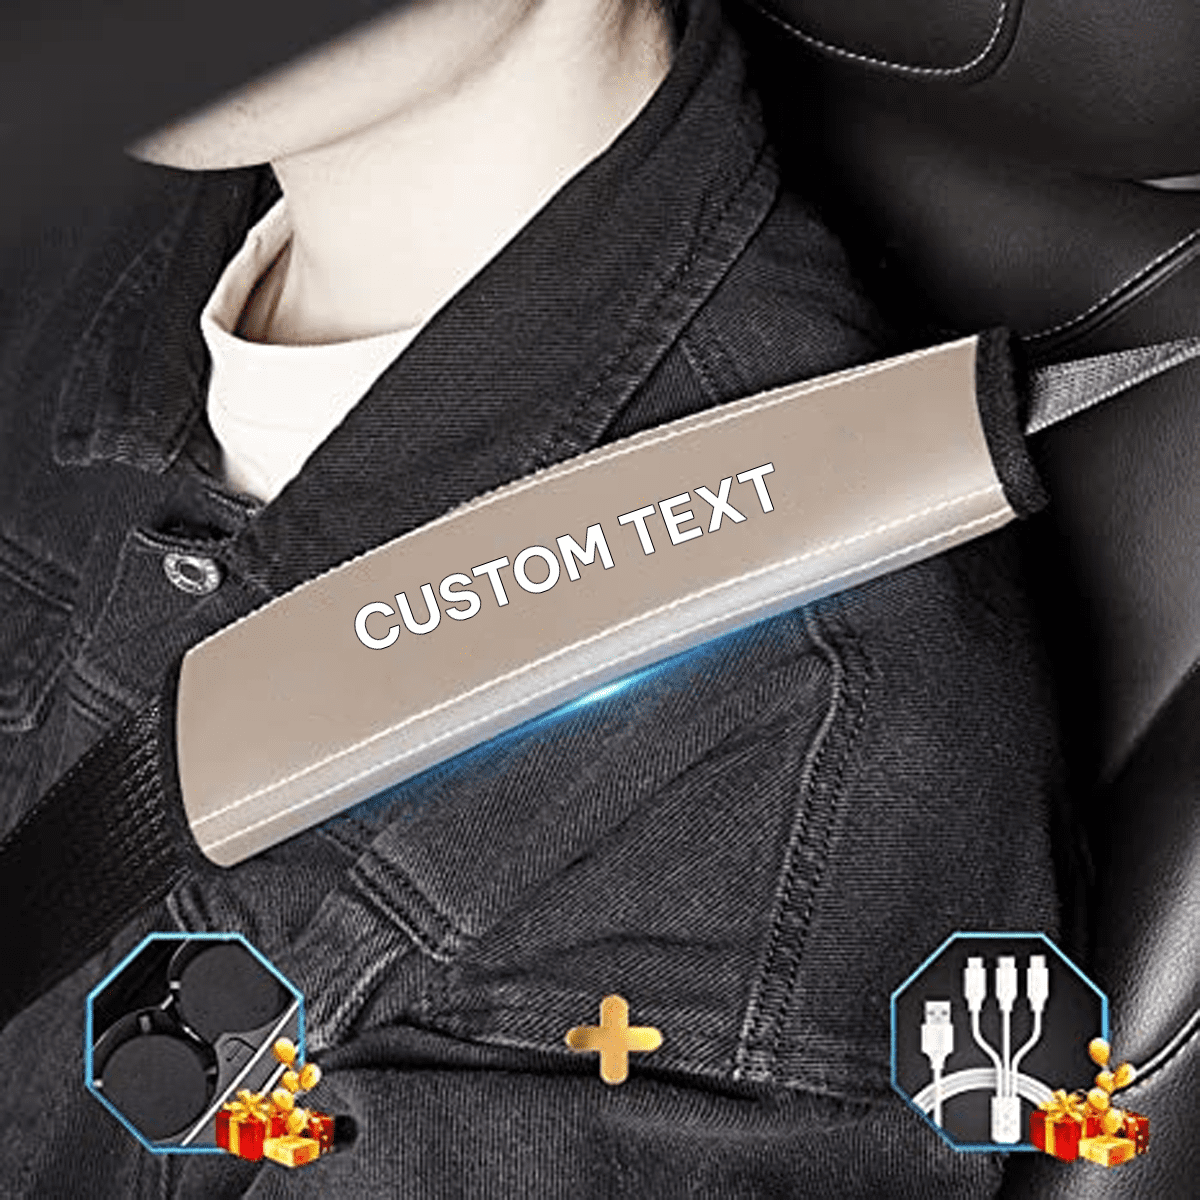 Custom Text and Logo Seat Belt Covers, Fit with Jaguar, Microfiber Leather Seat Belt Shoulder Pads for More Comfortable Driving, Set of 2pcs - Delicate Leather